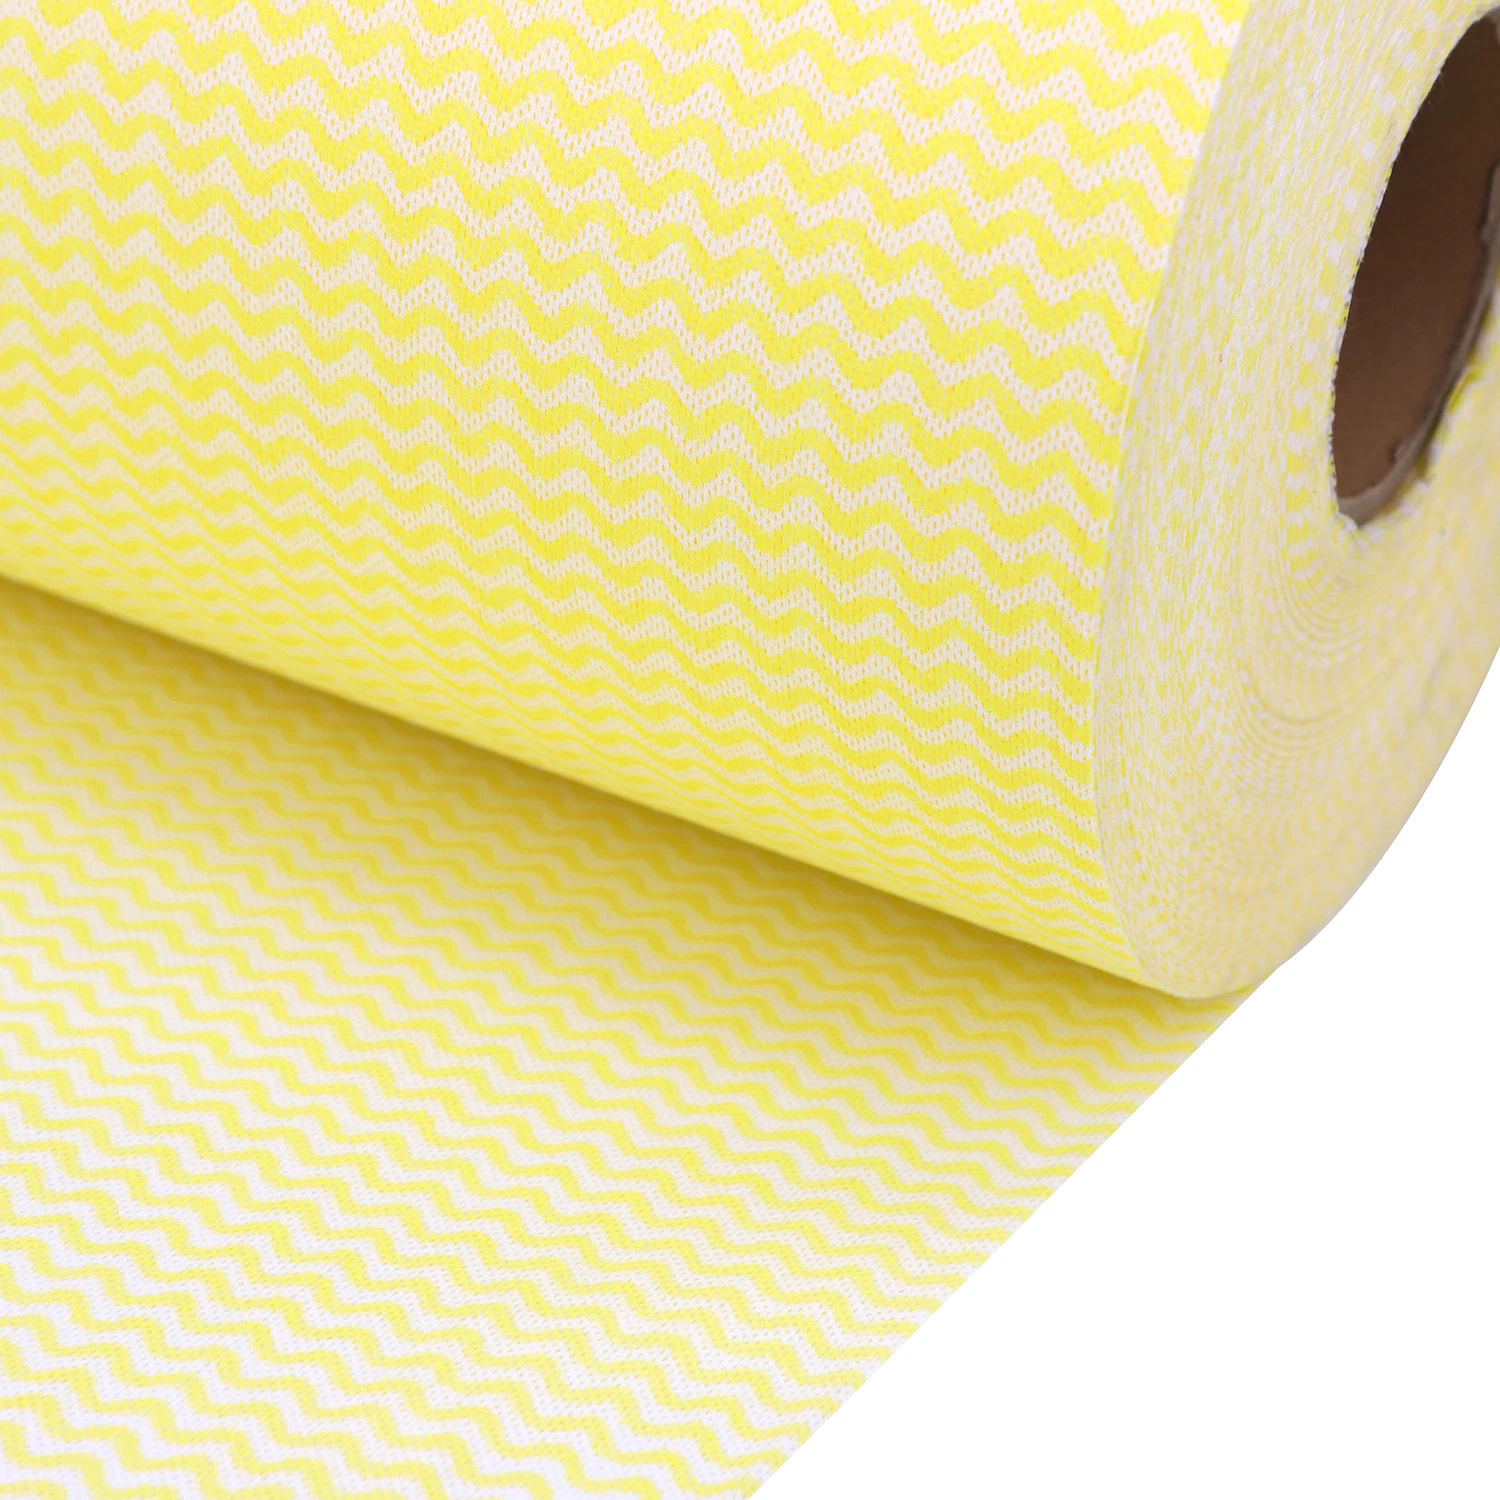 Whole Sale Disposable Dry Household Spunlace Nonwoven Cleaning Kitchen Towel Cloth Materials